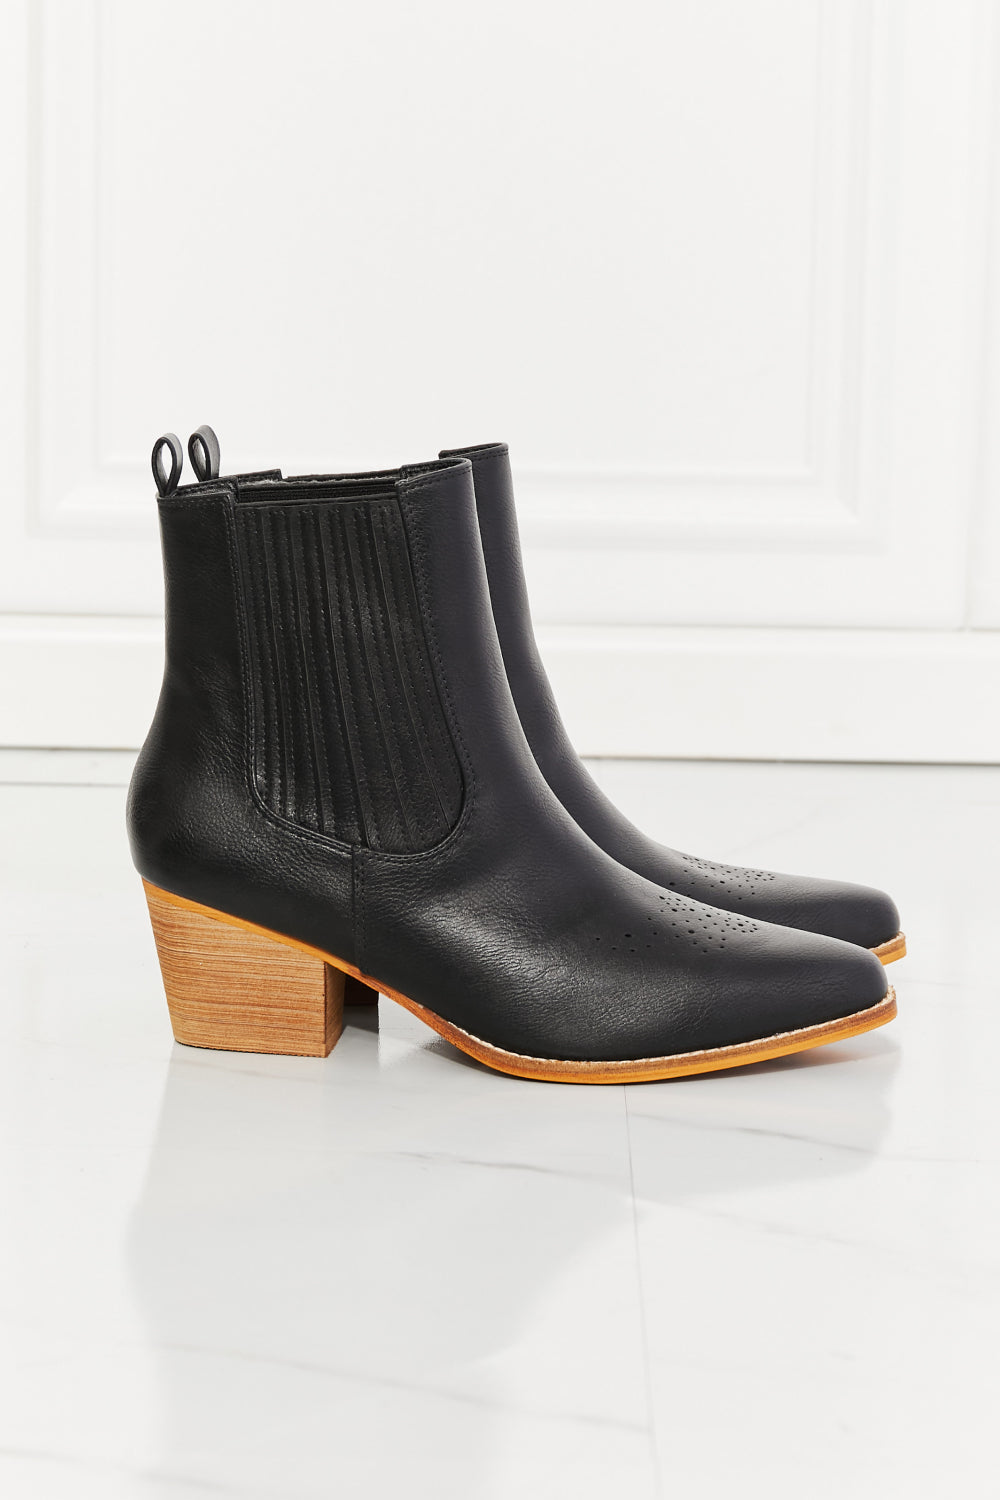 White Smoke MMShoes Love the Journey Stacked Heel Chelsea Boot in Black Sentient Beauty Fashions shoes